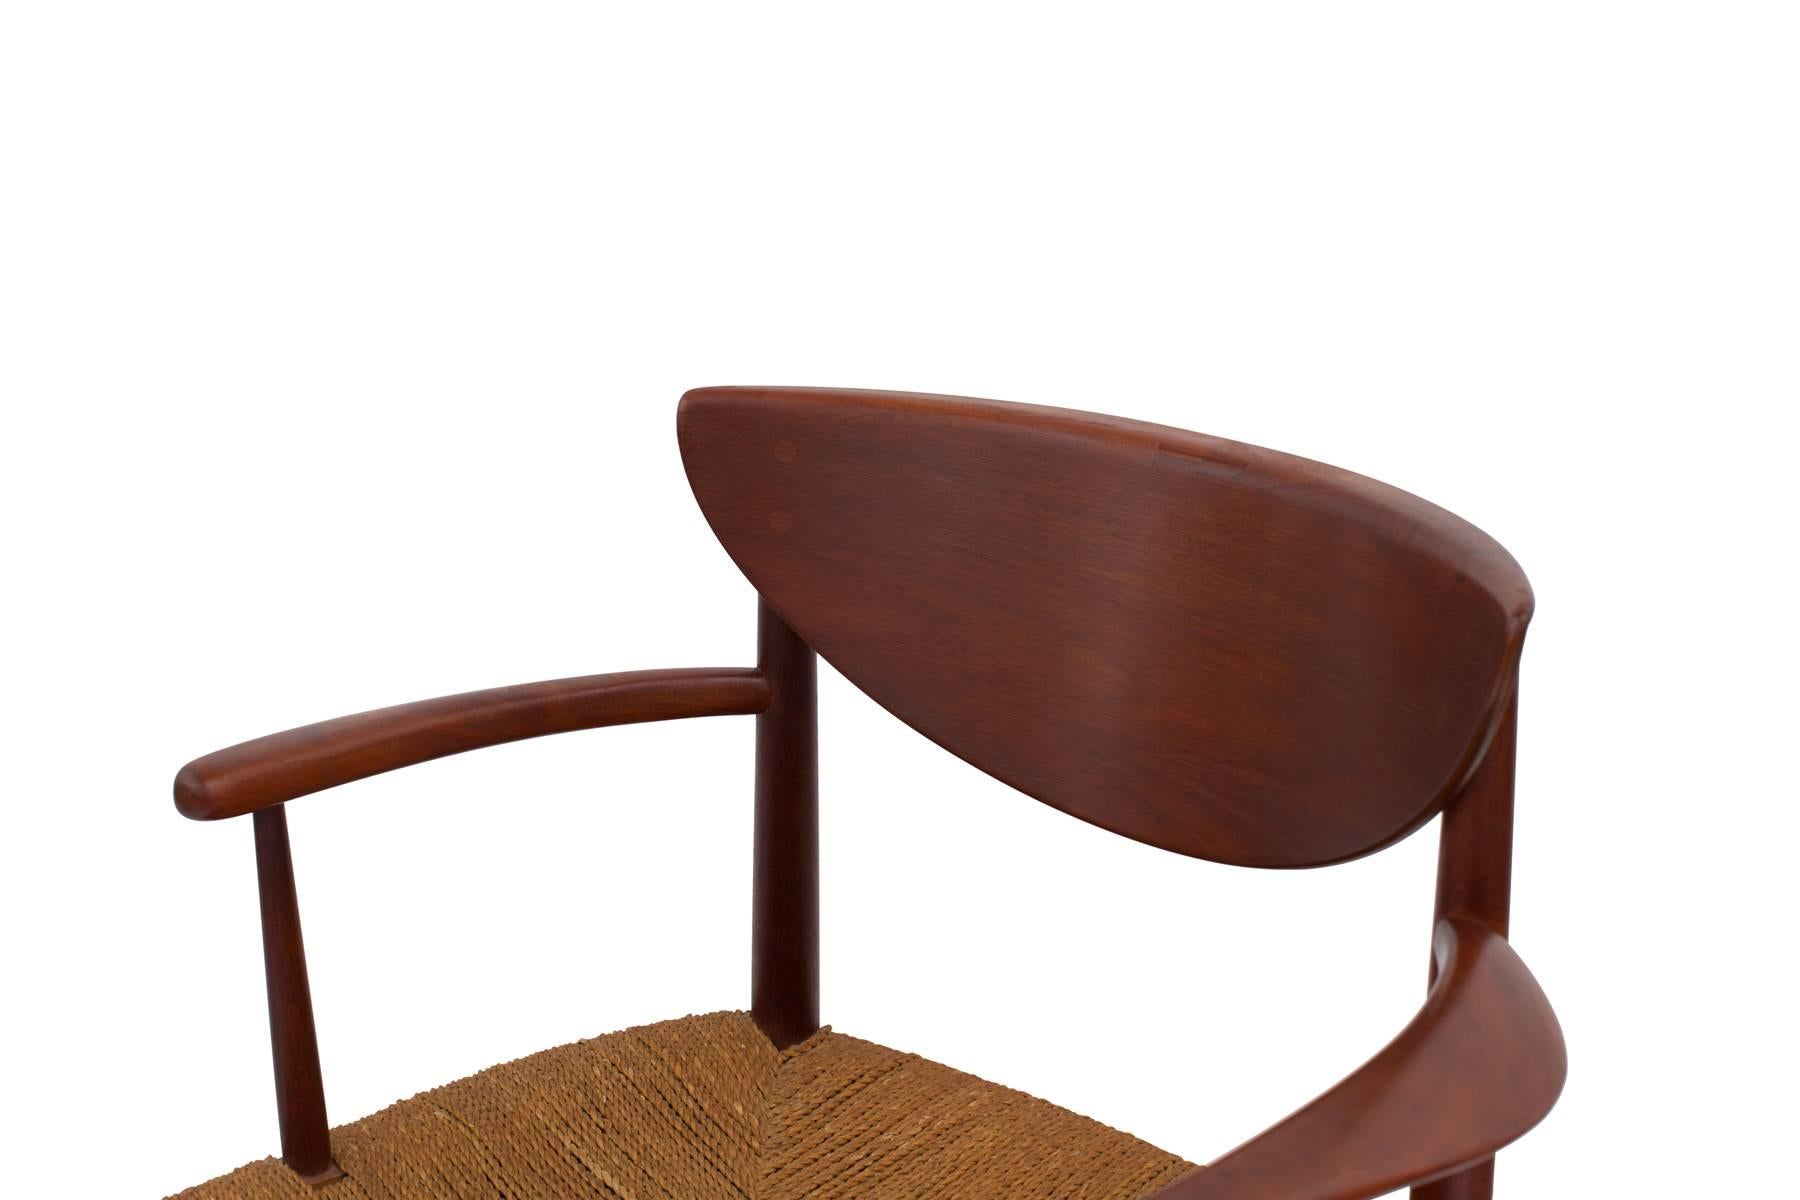 Mid-20th Century Hvidt & Mølgaard-Nielsen Teak and Cord Dining Chairs, Set of 6